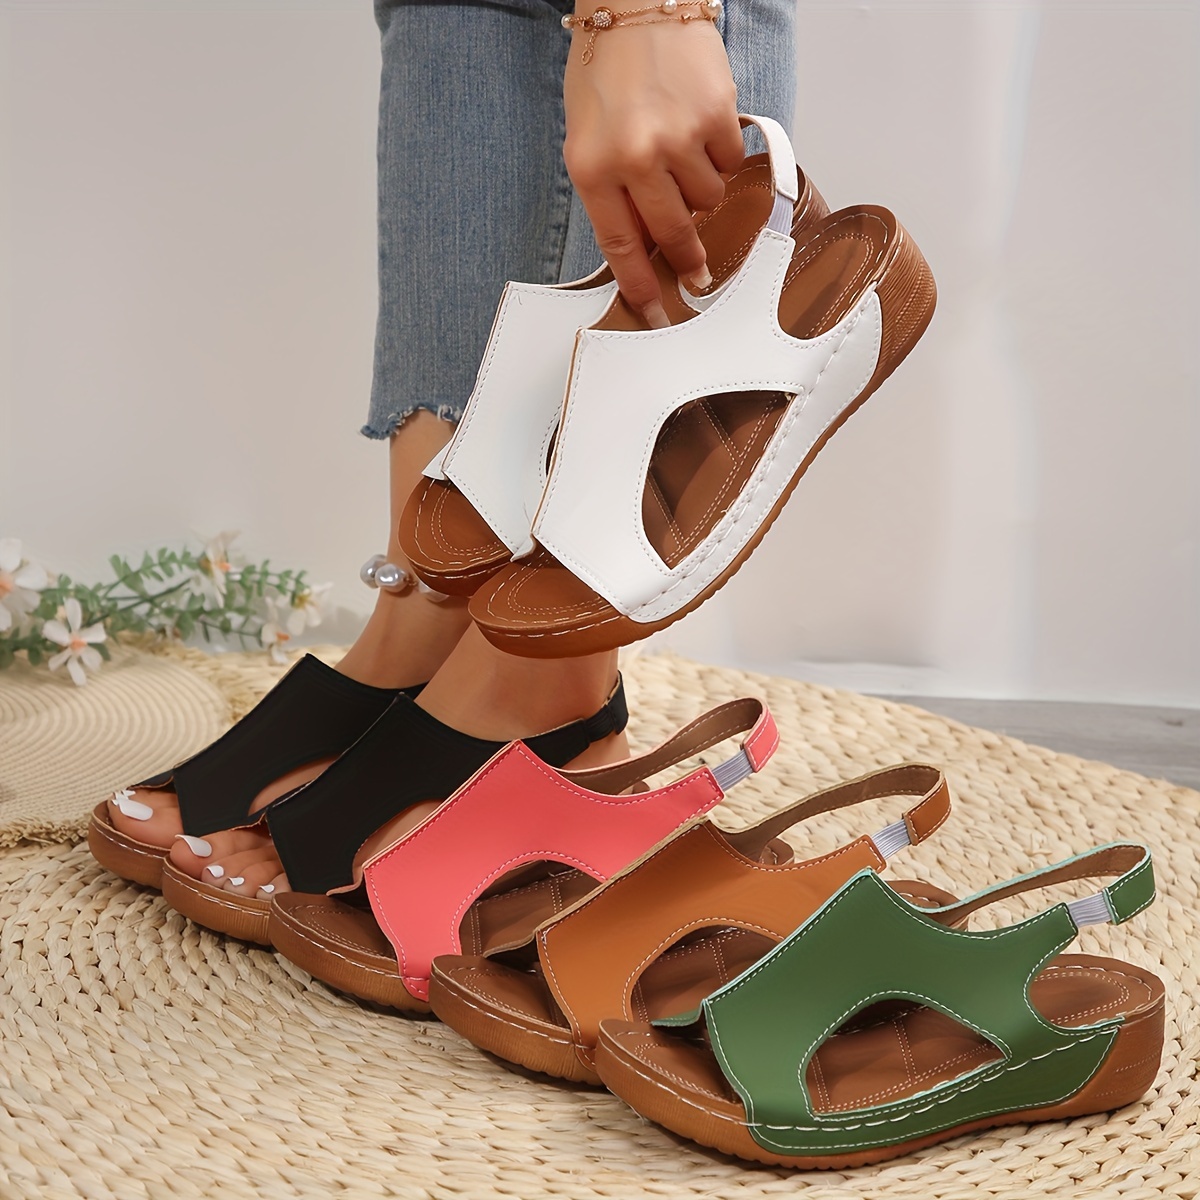 

Women's Elastic Wedge Sandals, Soft Sole Platform Slip On Walking Daily Footwear, Comfortable Open Toe Summer Shoes With Cut-out Design